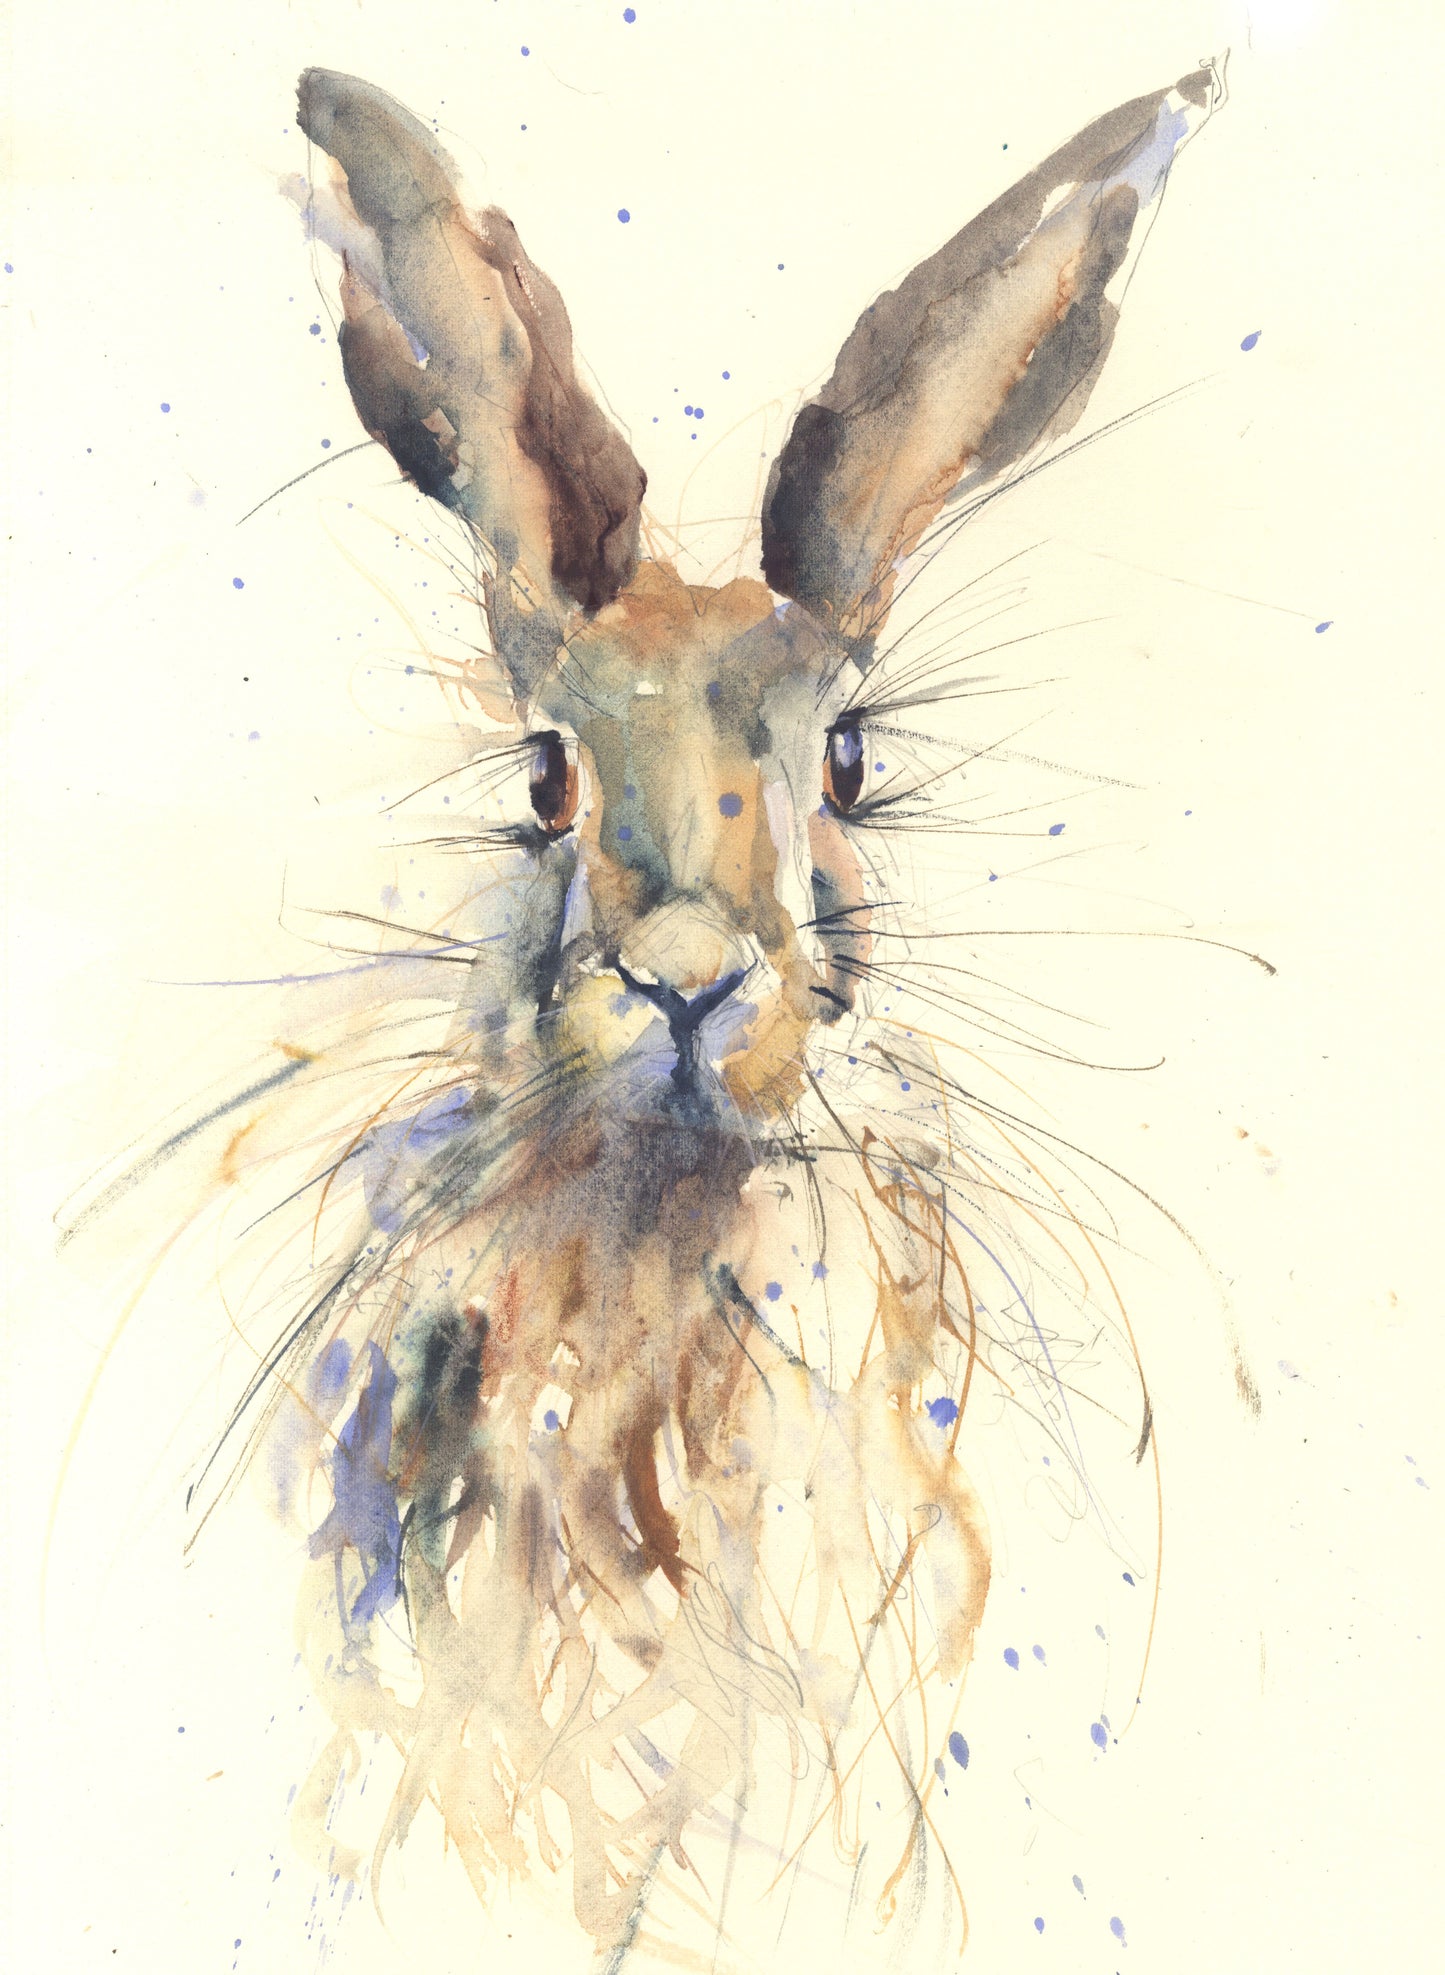 Johnny limited edition hare print